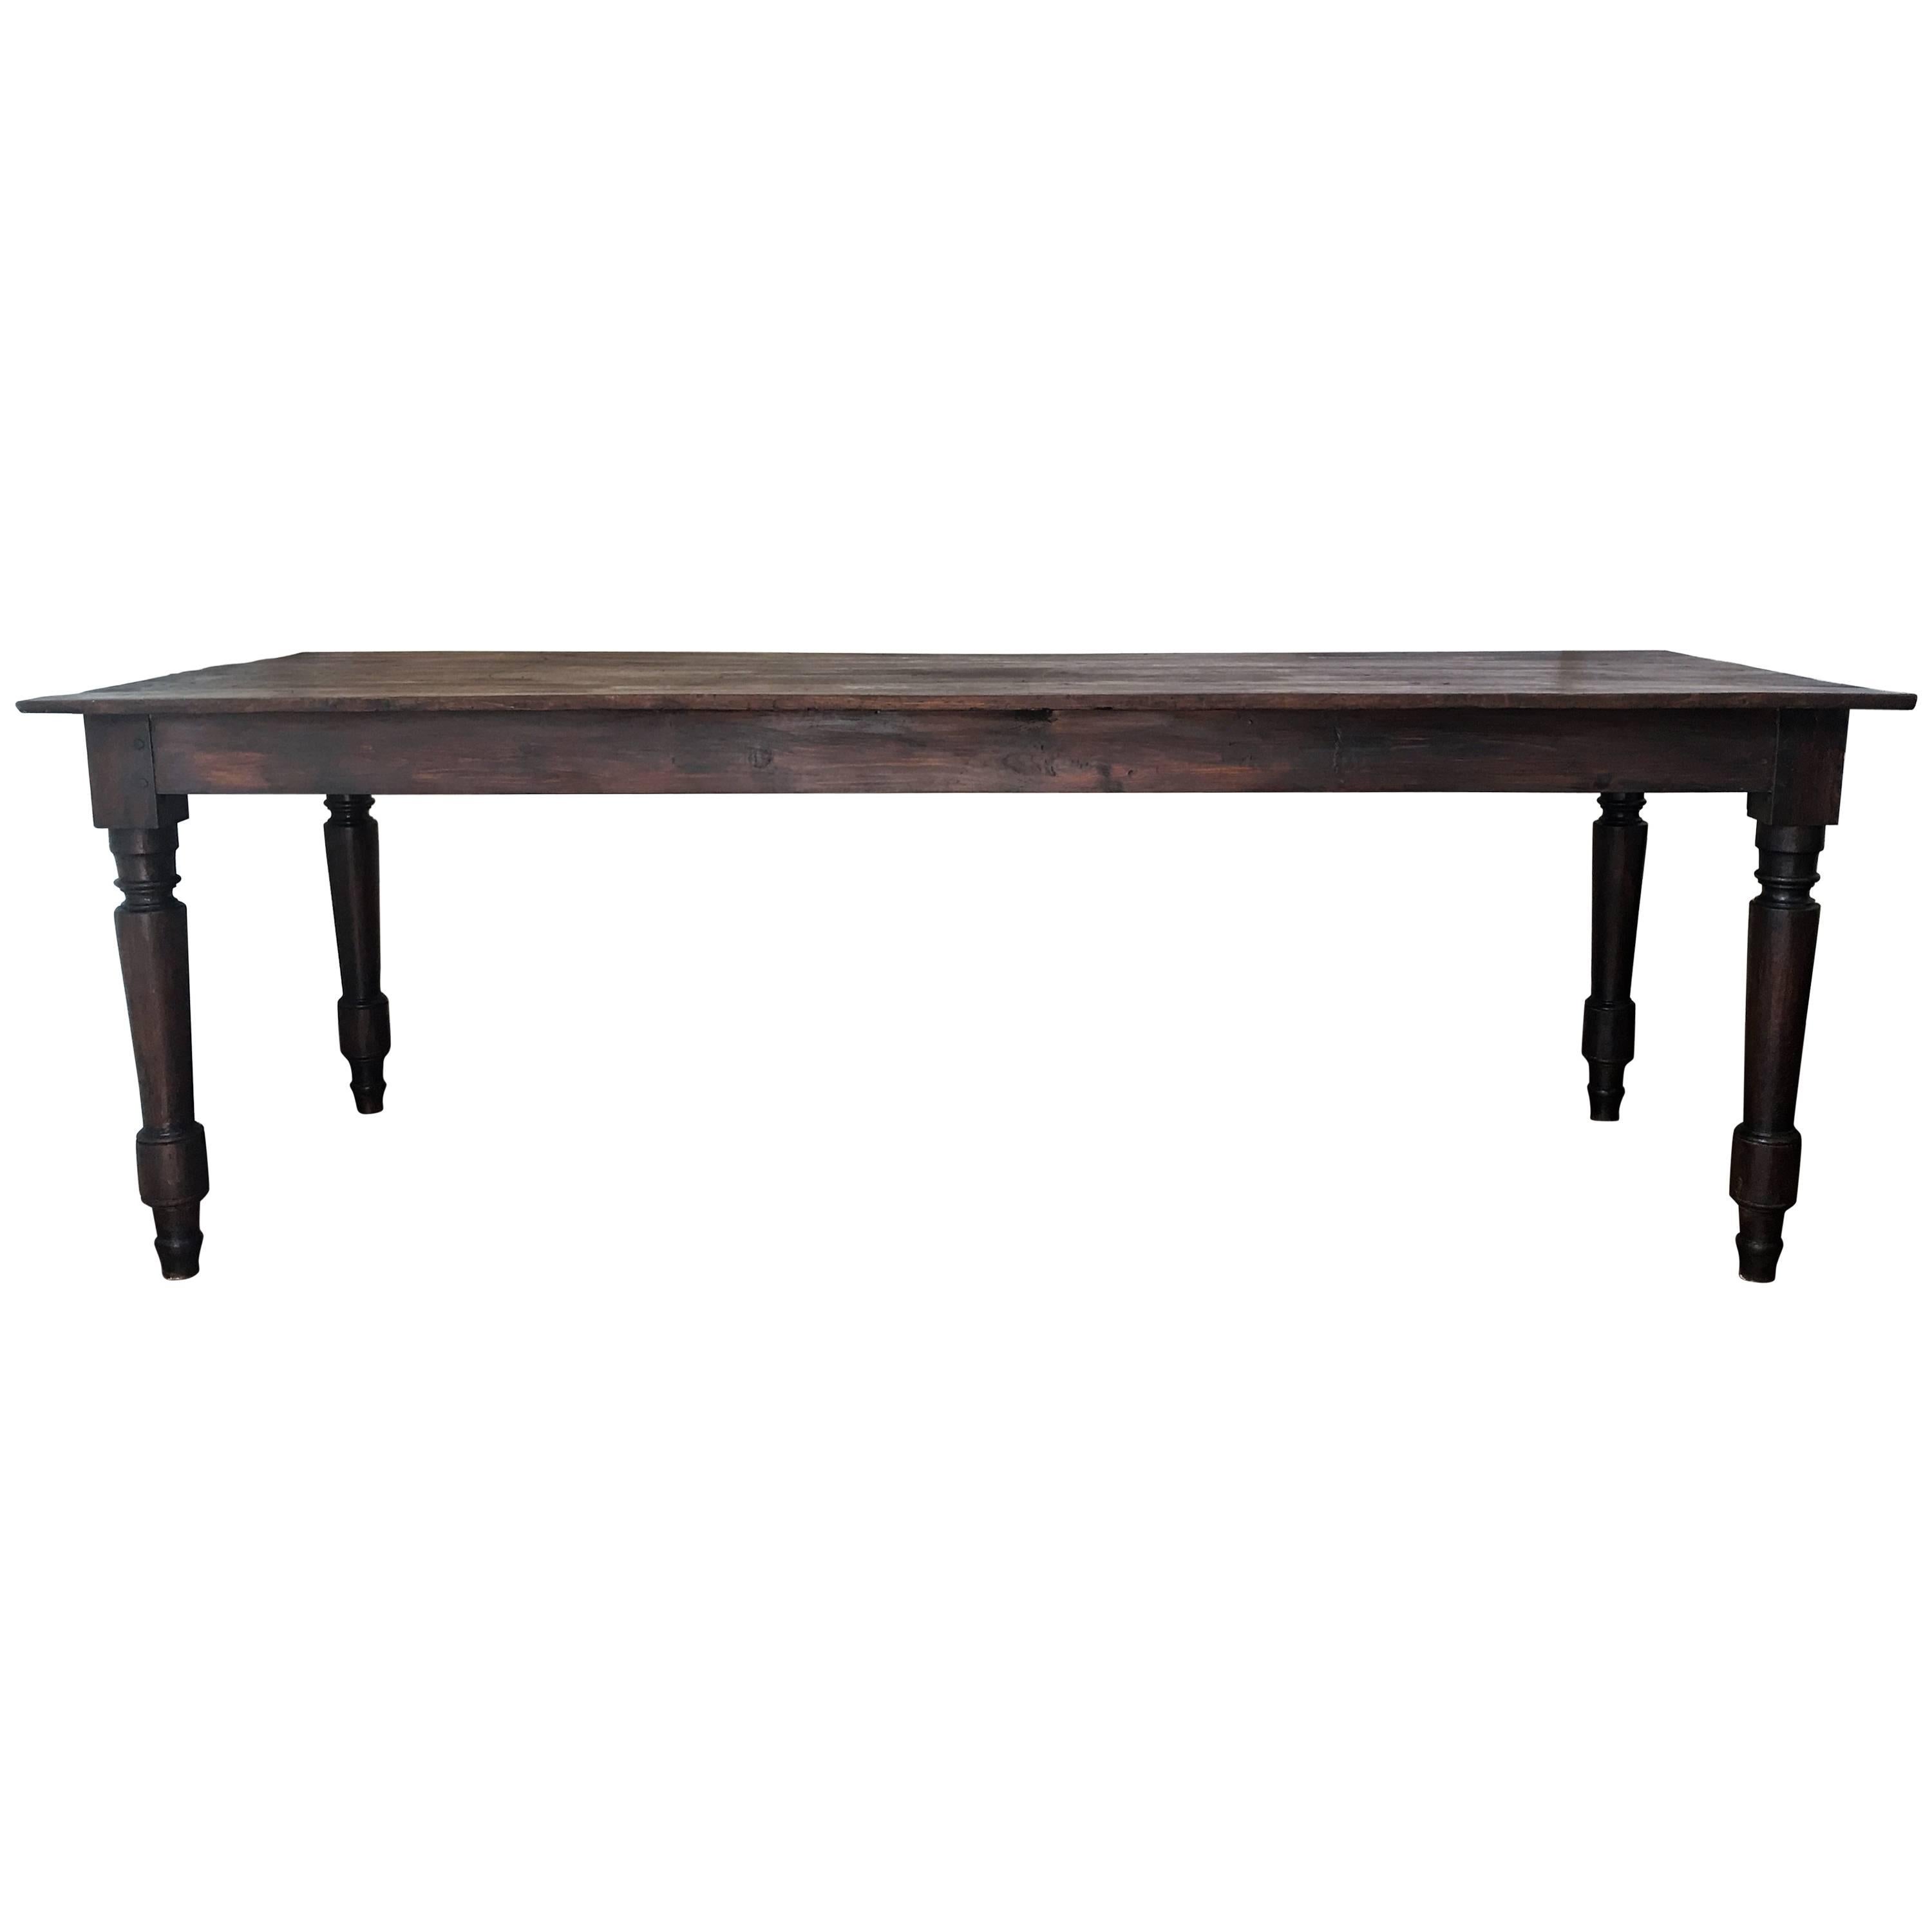 19th Large Spanish Dining Room Farm Table